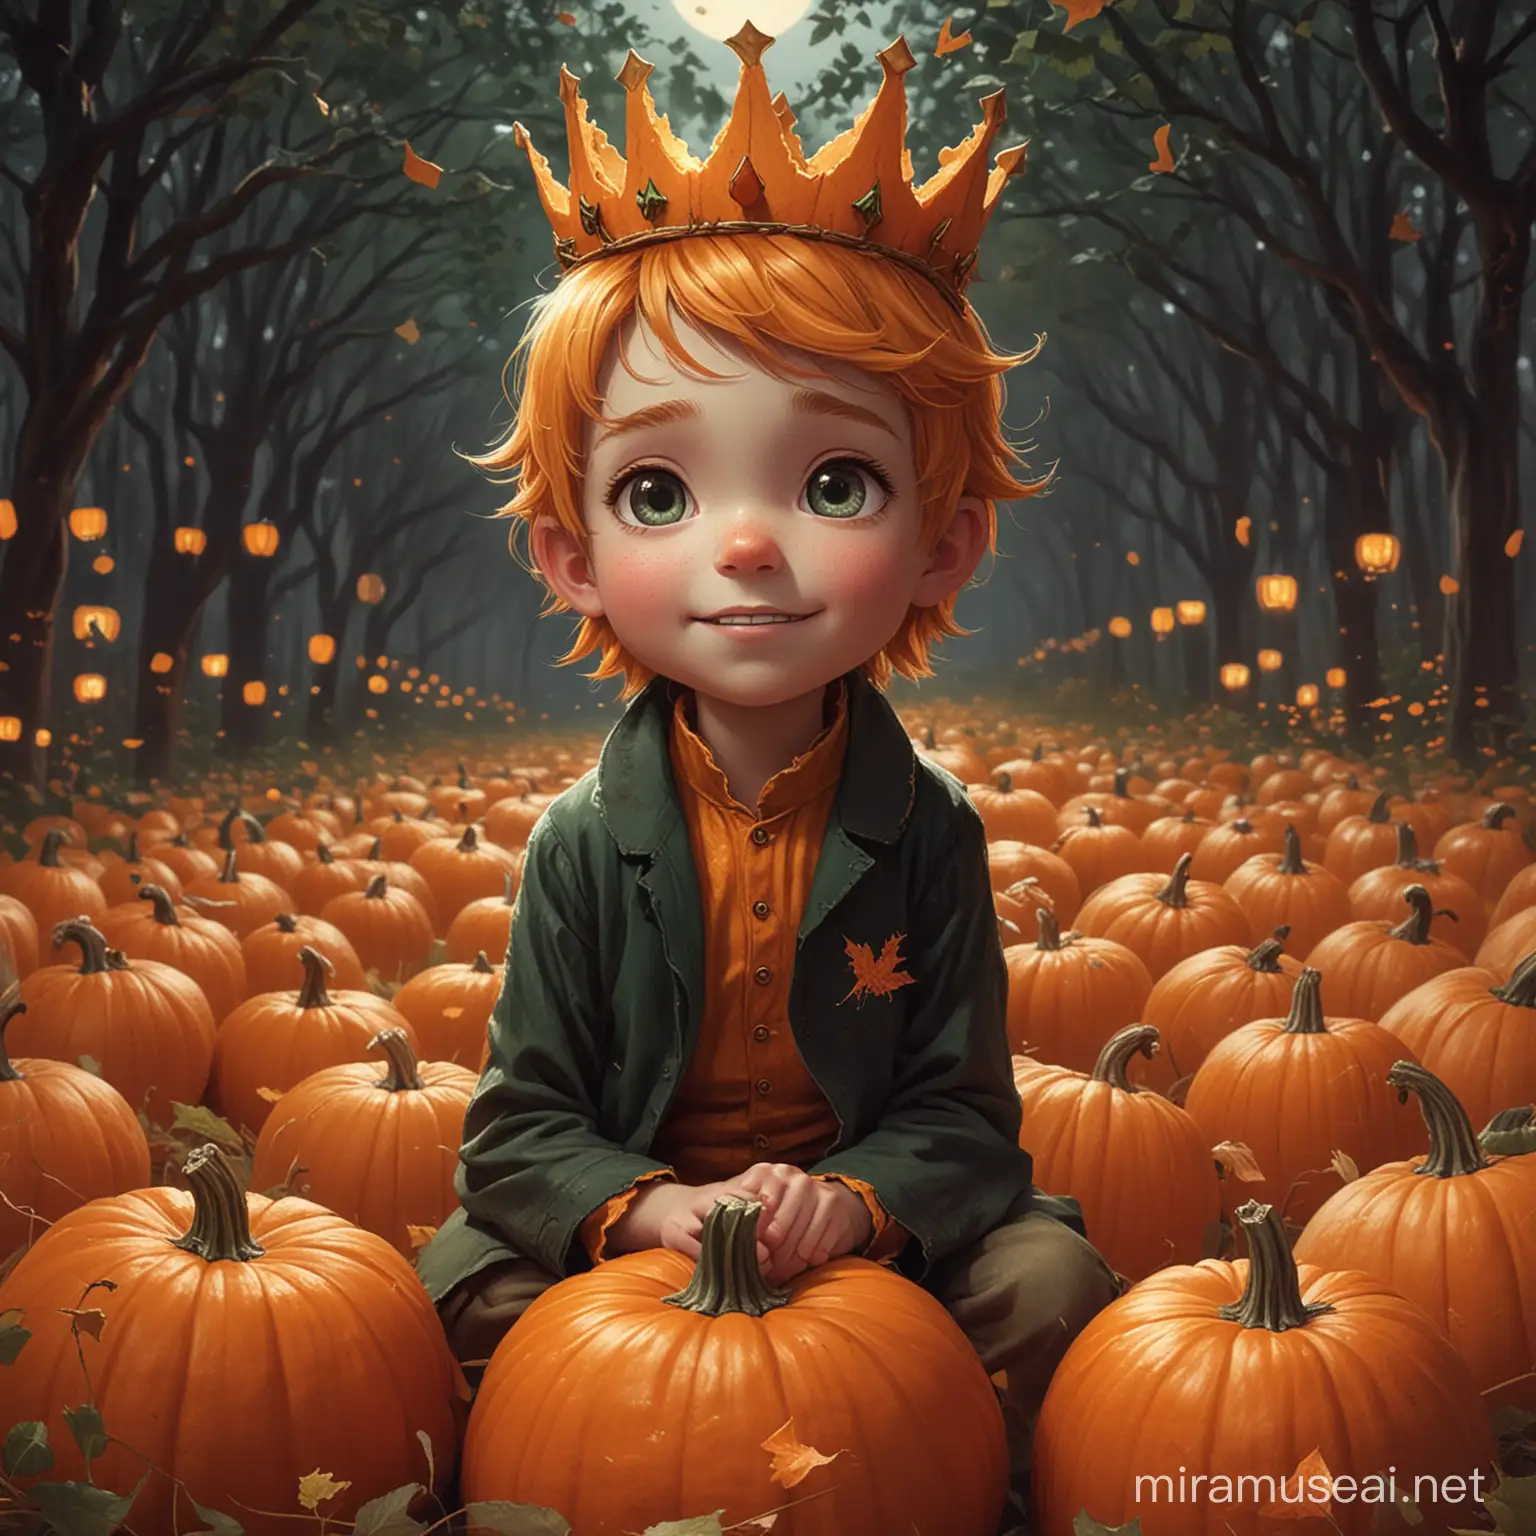 Adorable Pumpkin Prince Playing in Autumn Forest